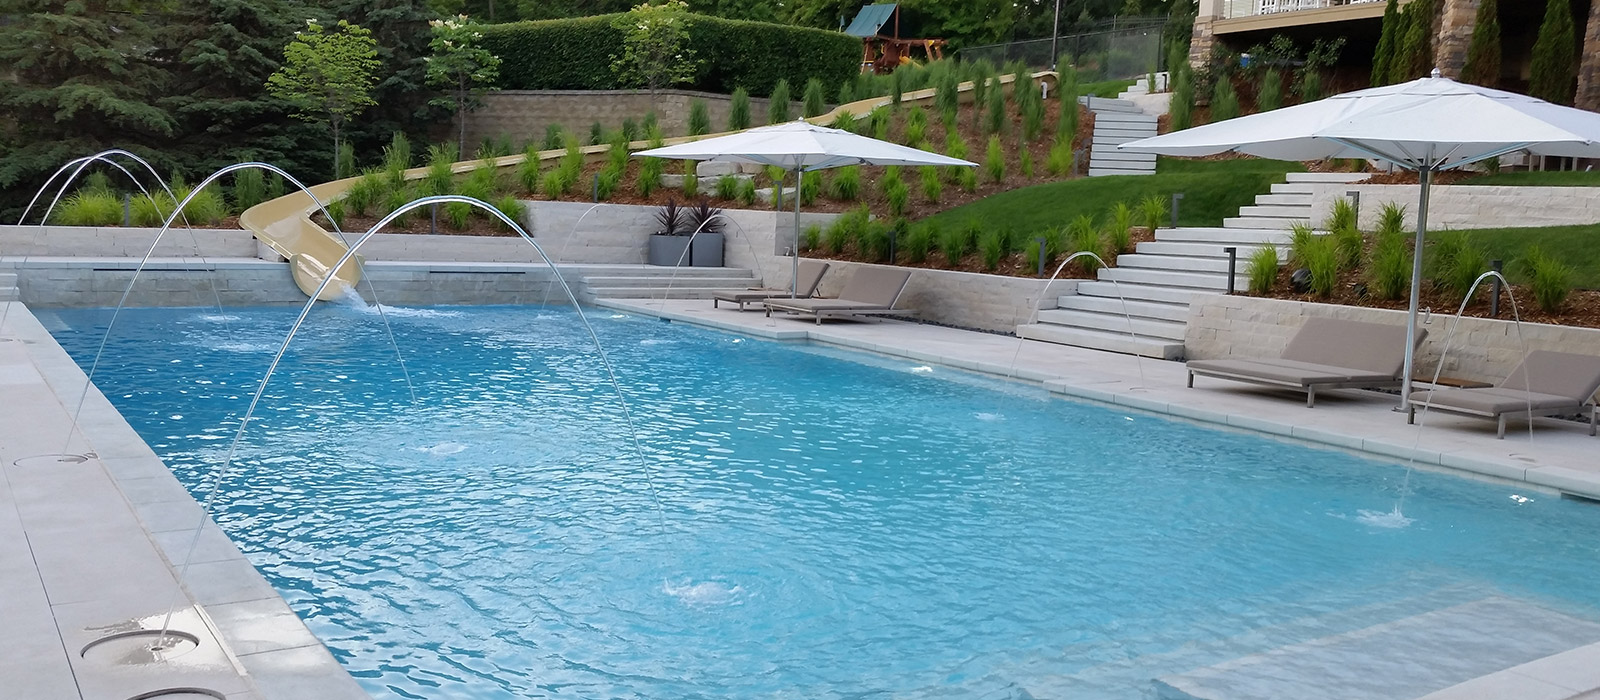 In-ground Concrete Pool With Built-in Slide Using the Natural Slope of the Landscape